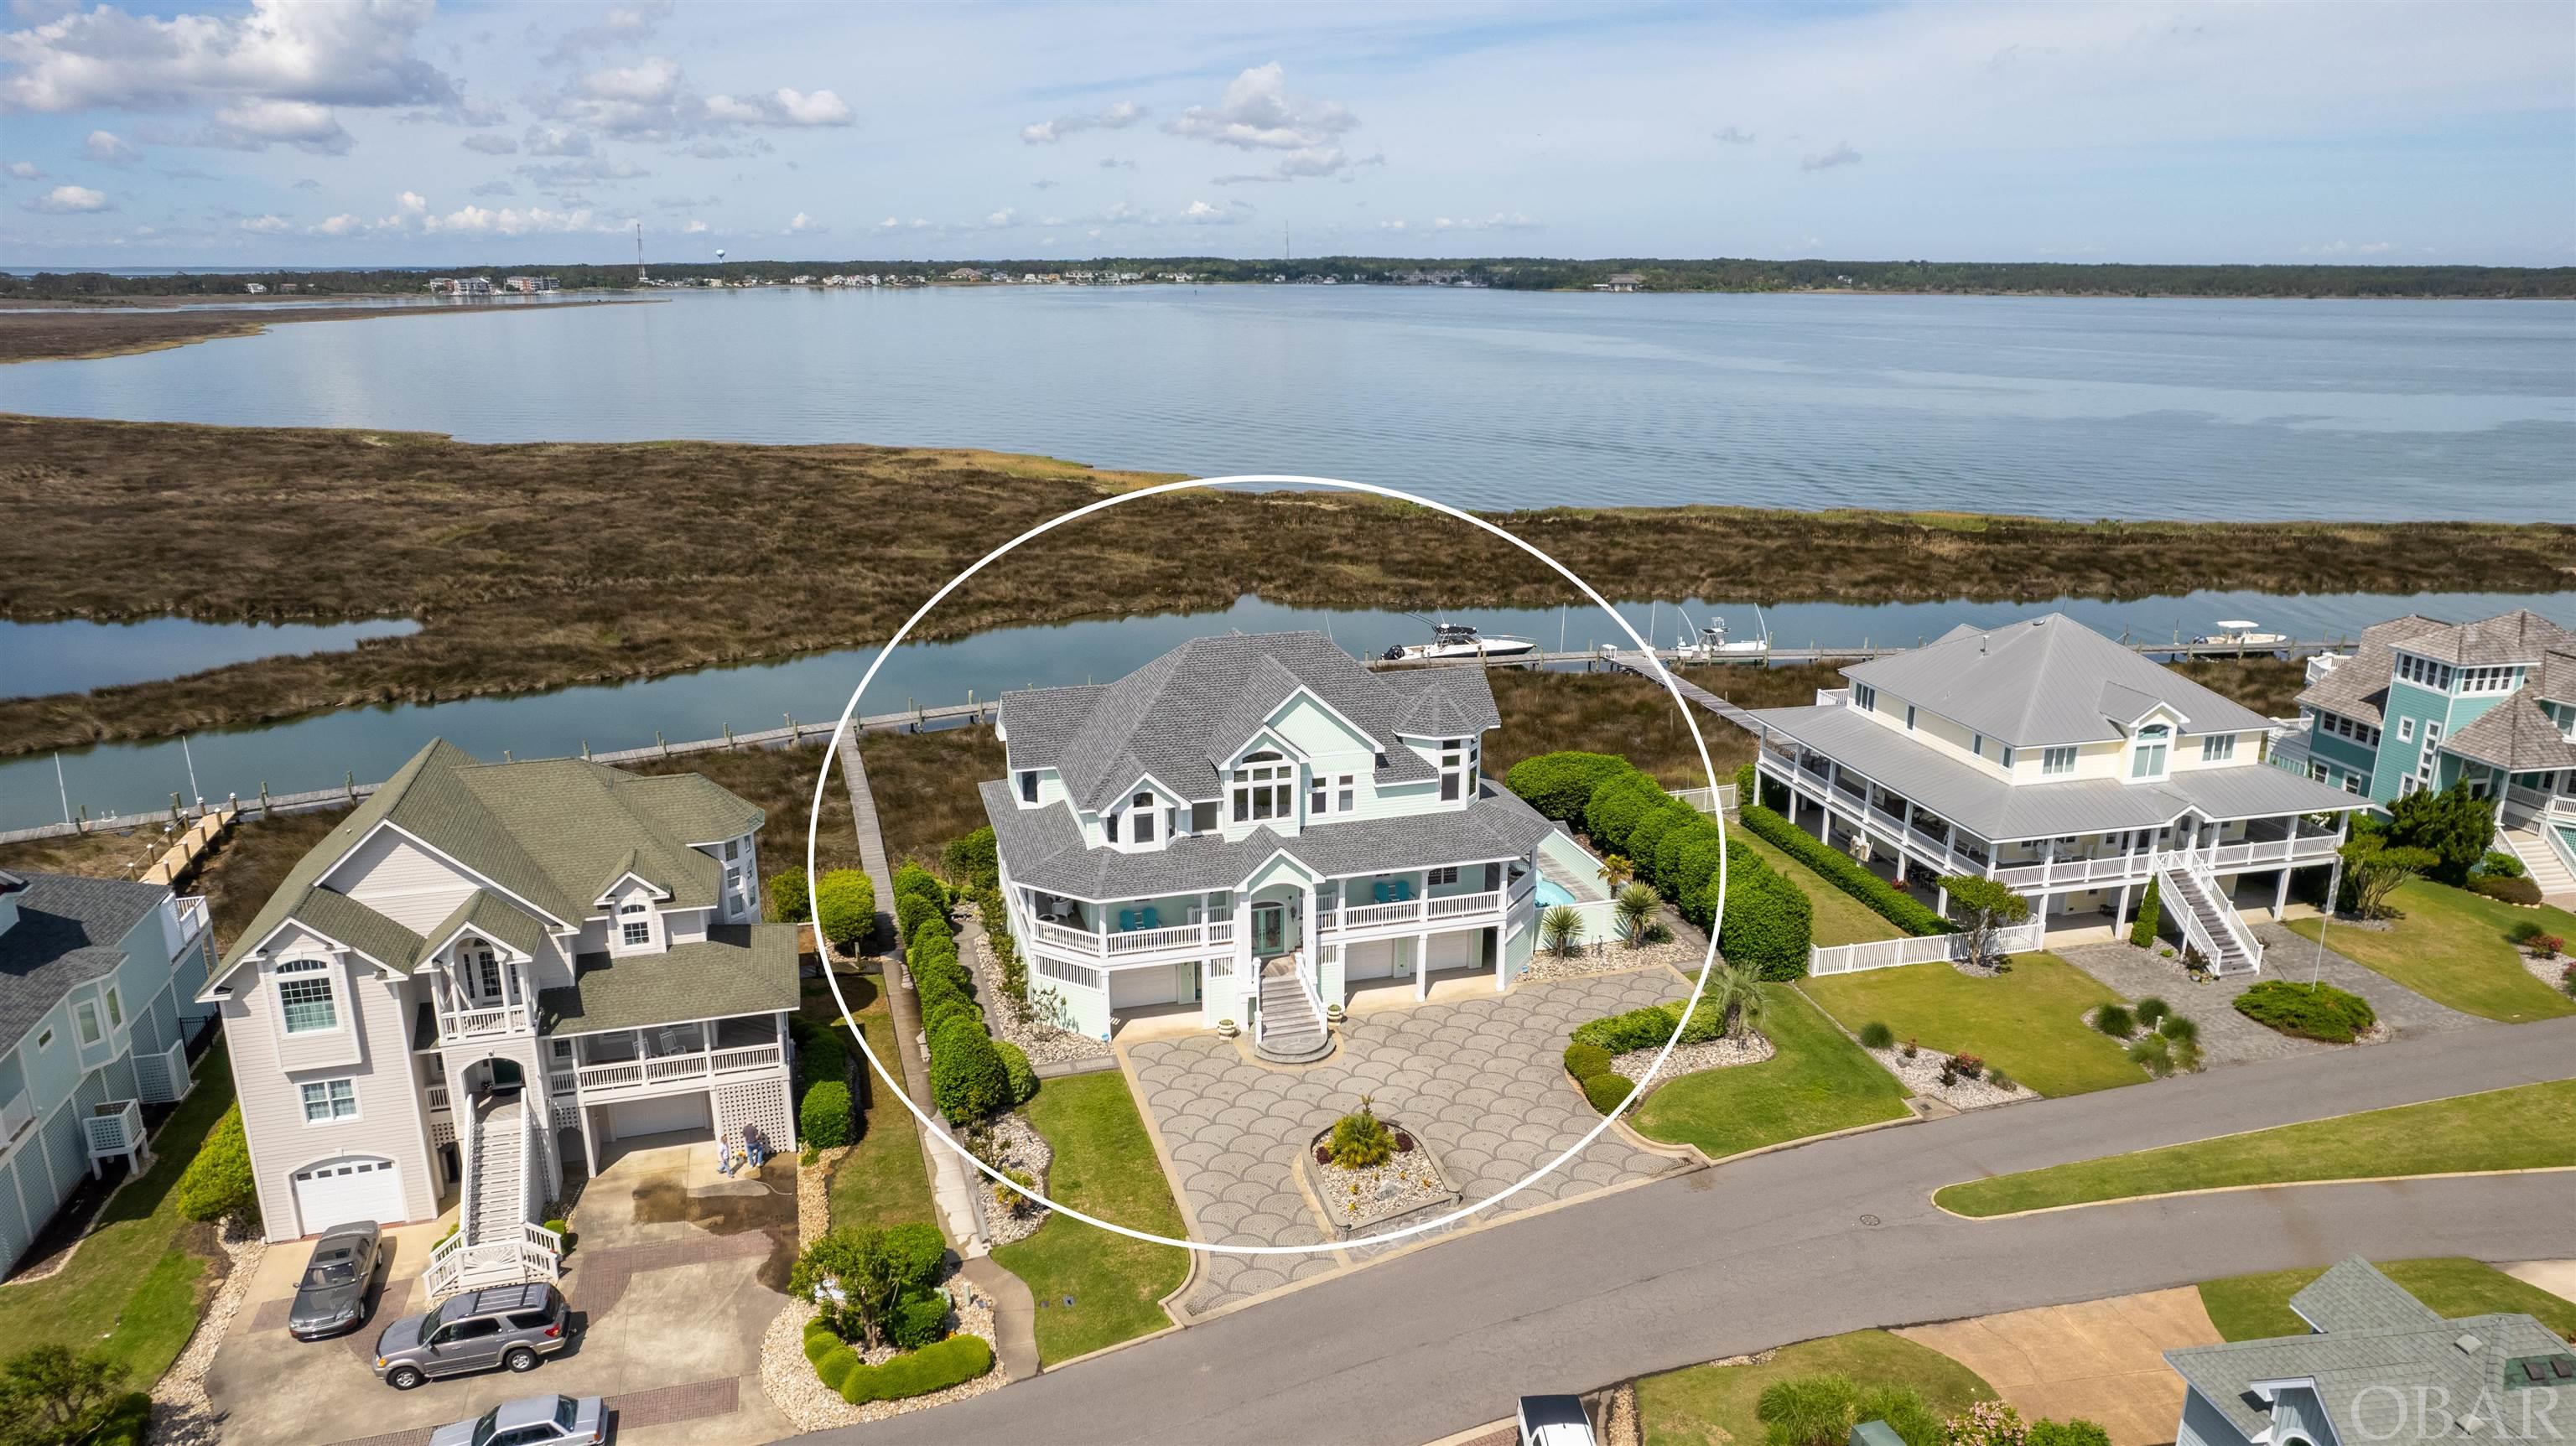 STUNNING WATERFRONT HOME!  BREATHTAKING VIEWS FROM EVERY ANGLE!  Located in the premier waterfront community of Pirates Cove, in the highly coveted/upscale Ballast Point, this is a dream home boasting unobstructed views of Shallowbag Bay and the Roanoke Sound!  Beautifully designed and tastefully appointed!  5 bedrooms (all king beds) and 5.5 baths!  Well executed floor plan featuring one level living on the top floor which is accessible by elevator!  Open and spacious great room featuring a wet bar and ice maker.  Gorgeous kitchen with butler pantry...perfect for entertaining and family gatherings!  Beautiful master suite featuring 2 walk-in closets, custom tile shower, and private access to top floor deck!  Mid level has four spacious bedrooms (2 en-suite) that surround a common recreation area. The ground level features a spacious and fun recreation room with kitchenette!  Awesome multi-level outdoor living spaces including Ipe wrap around decking, covered porches, in-ground waterfront pool, hot tub...all with incredible views of the Roanoke Sound!!  Gorgeous cobblestone driveway! Tiled and climate controlled 3 bay garage with commercial ice maker!  House is also wired for a generator!  Featured Updates include: New fortified roof, new on demand gas water heater with pump, 8 brand new smart TVs, all Anderson windows & all faucets have been serviced, reinforced bulkhead, brand new outside shower and hot tub, and so much more!  Enjoy the Pirates Cove lifestyle and take in all of the amenities that this premier, gated community has to offer including clubhouse, swimming pools, tennis courts, fitness center, playground, on-site waterfront restaurant, and boating/world-class fishing marina! There is a 35' slip reserved for your boat w power & water at the dock!  A MUST SEE!!